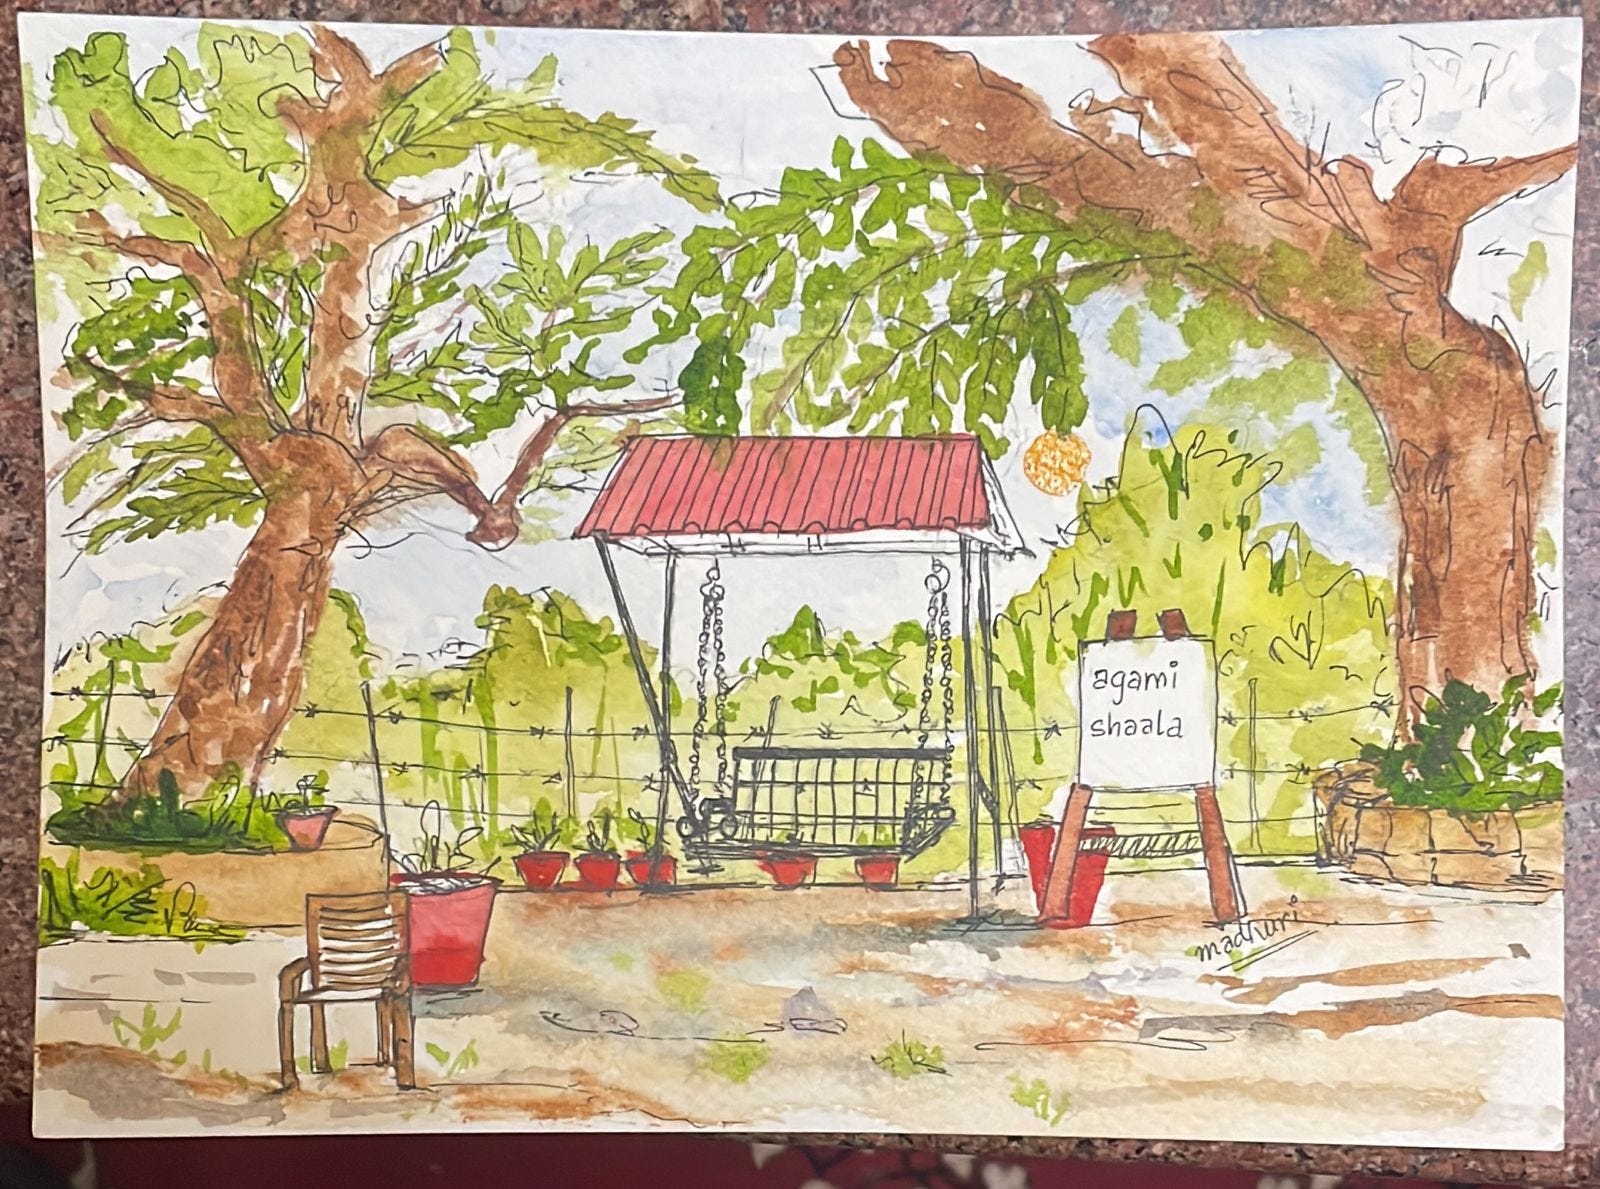 Watercolour painting of a swing with a small display canvas saying 'Agamishaala'